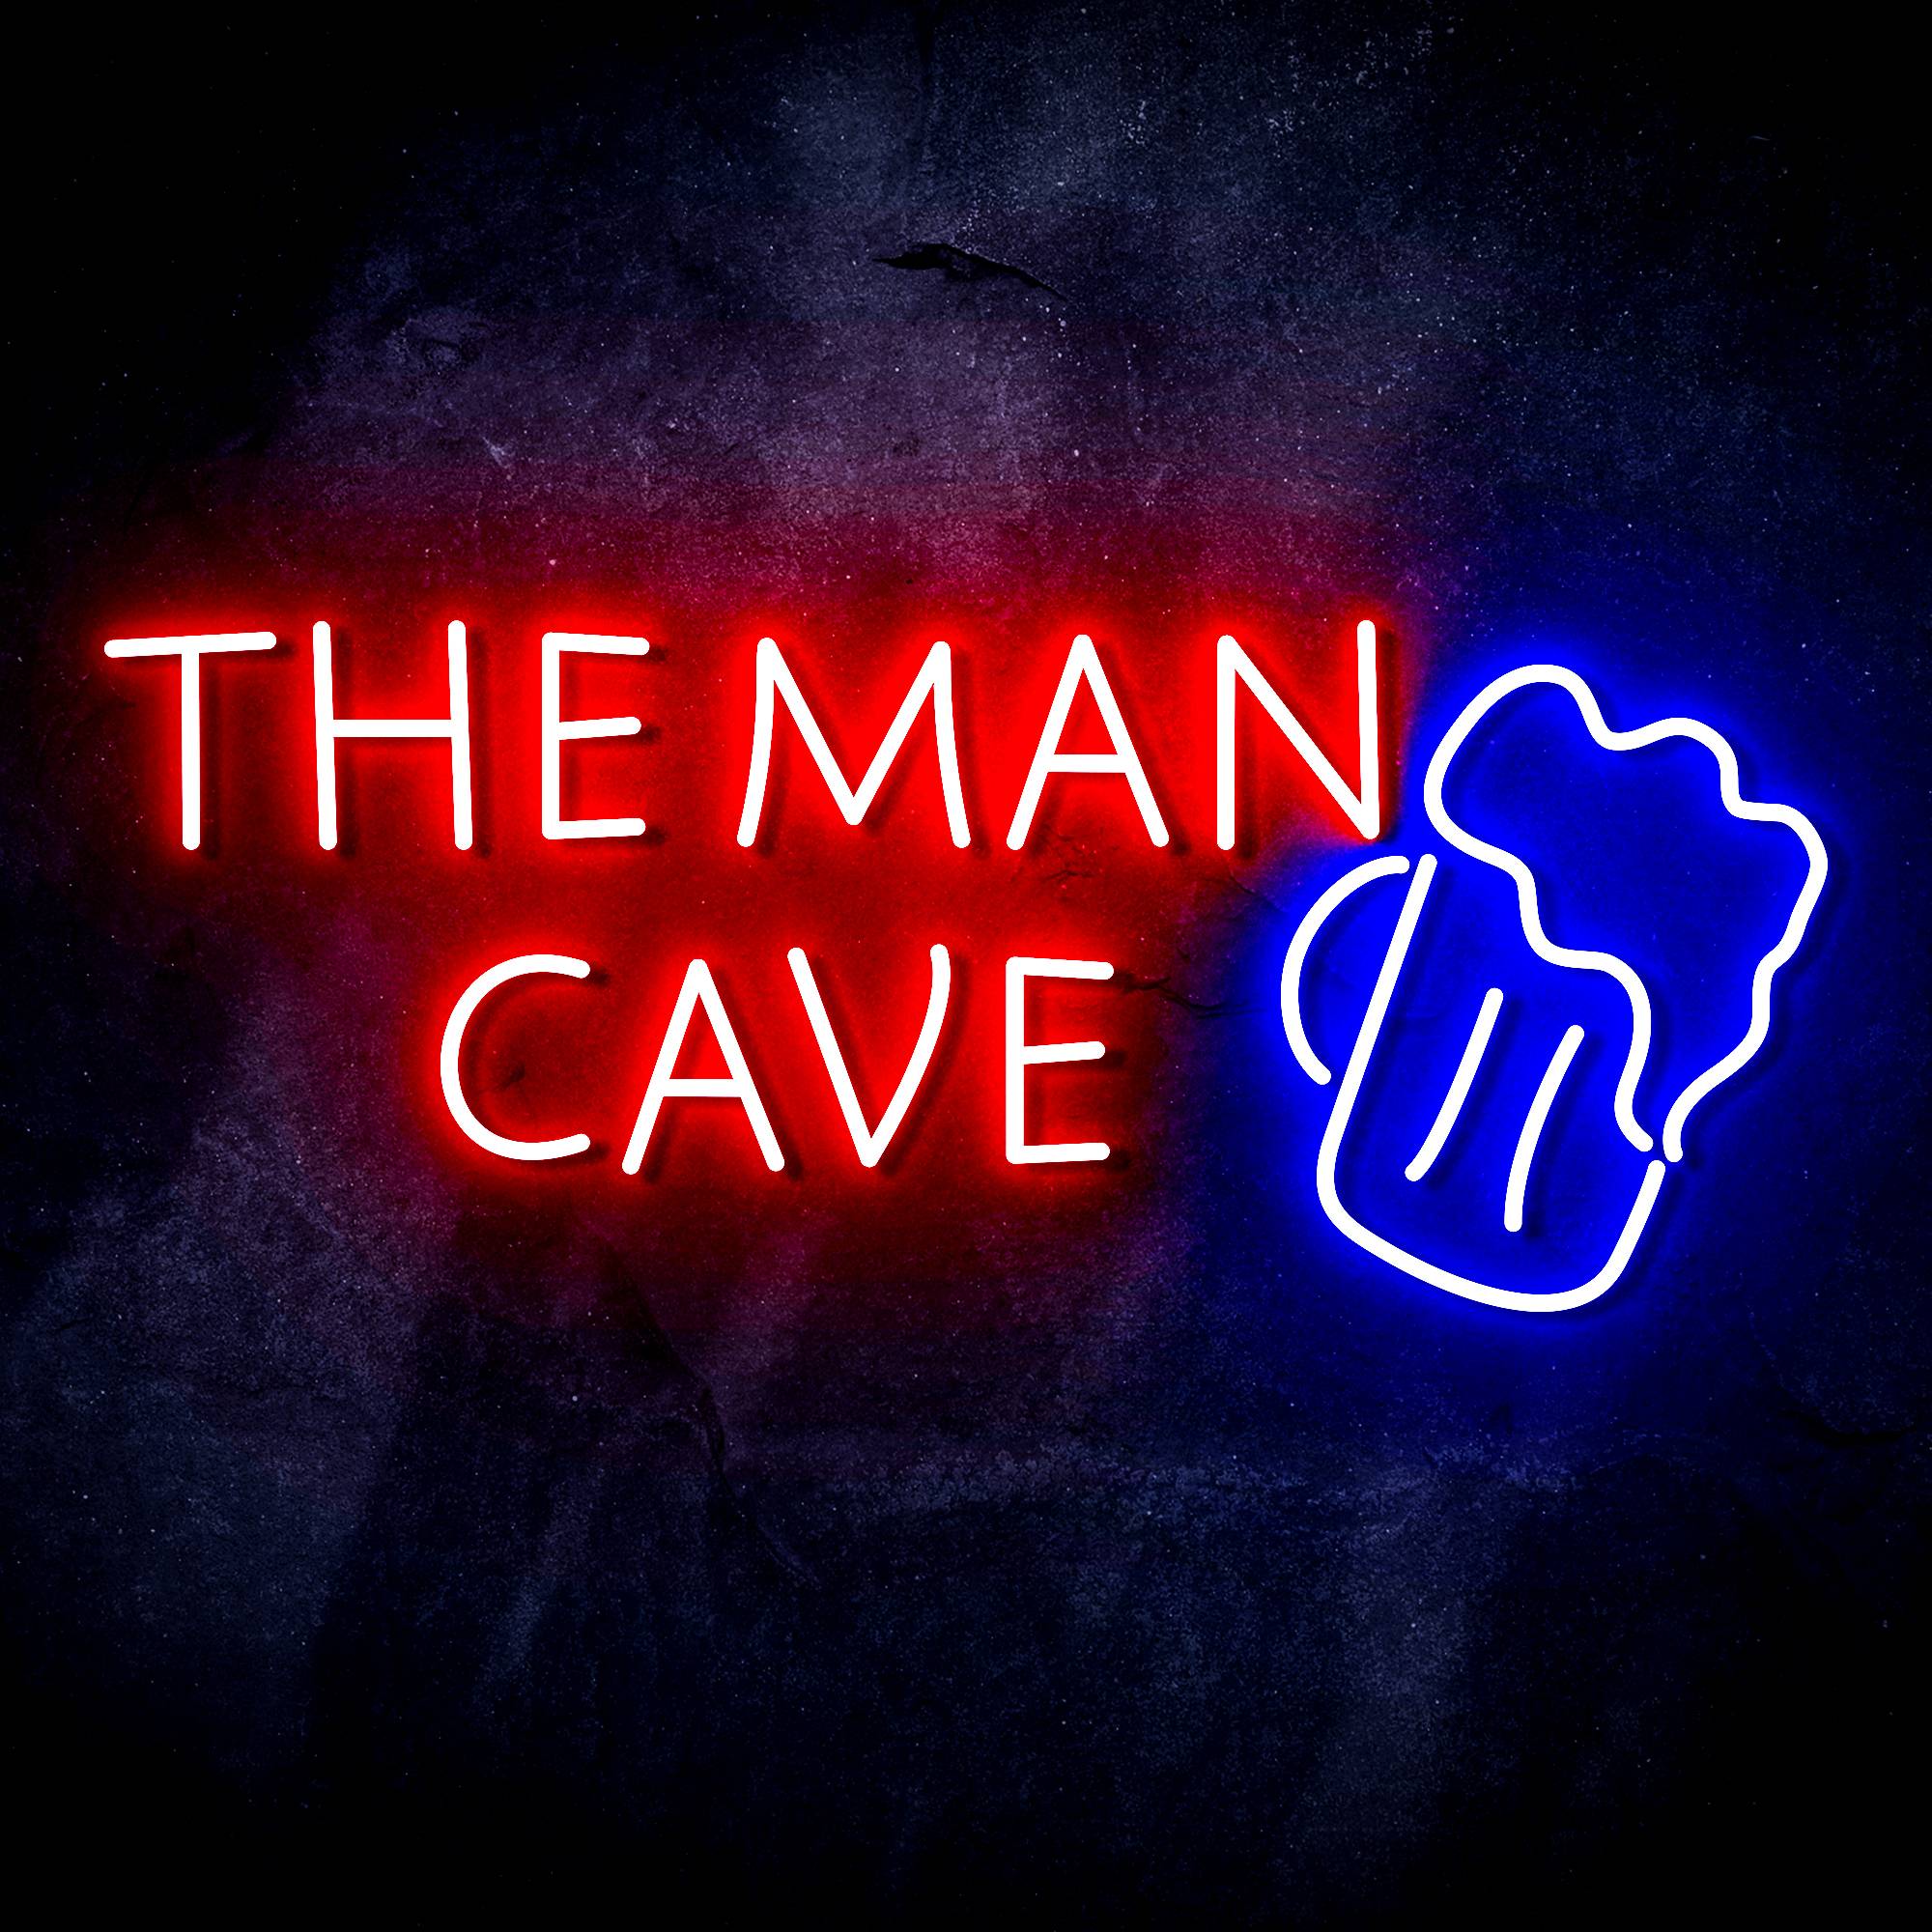 The Man Cave with Beer Mug Signage LED Neon Sign